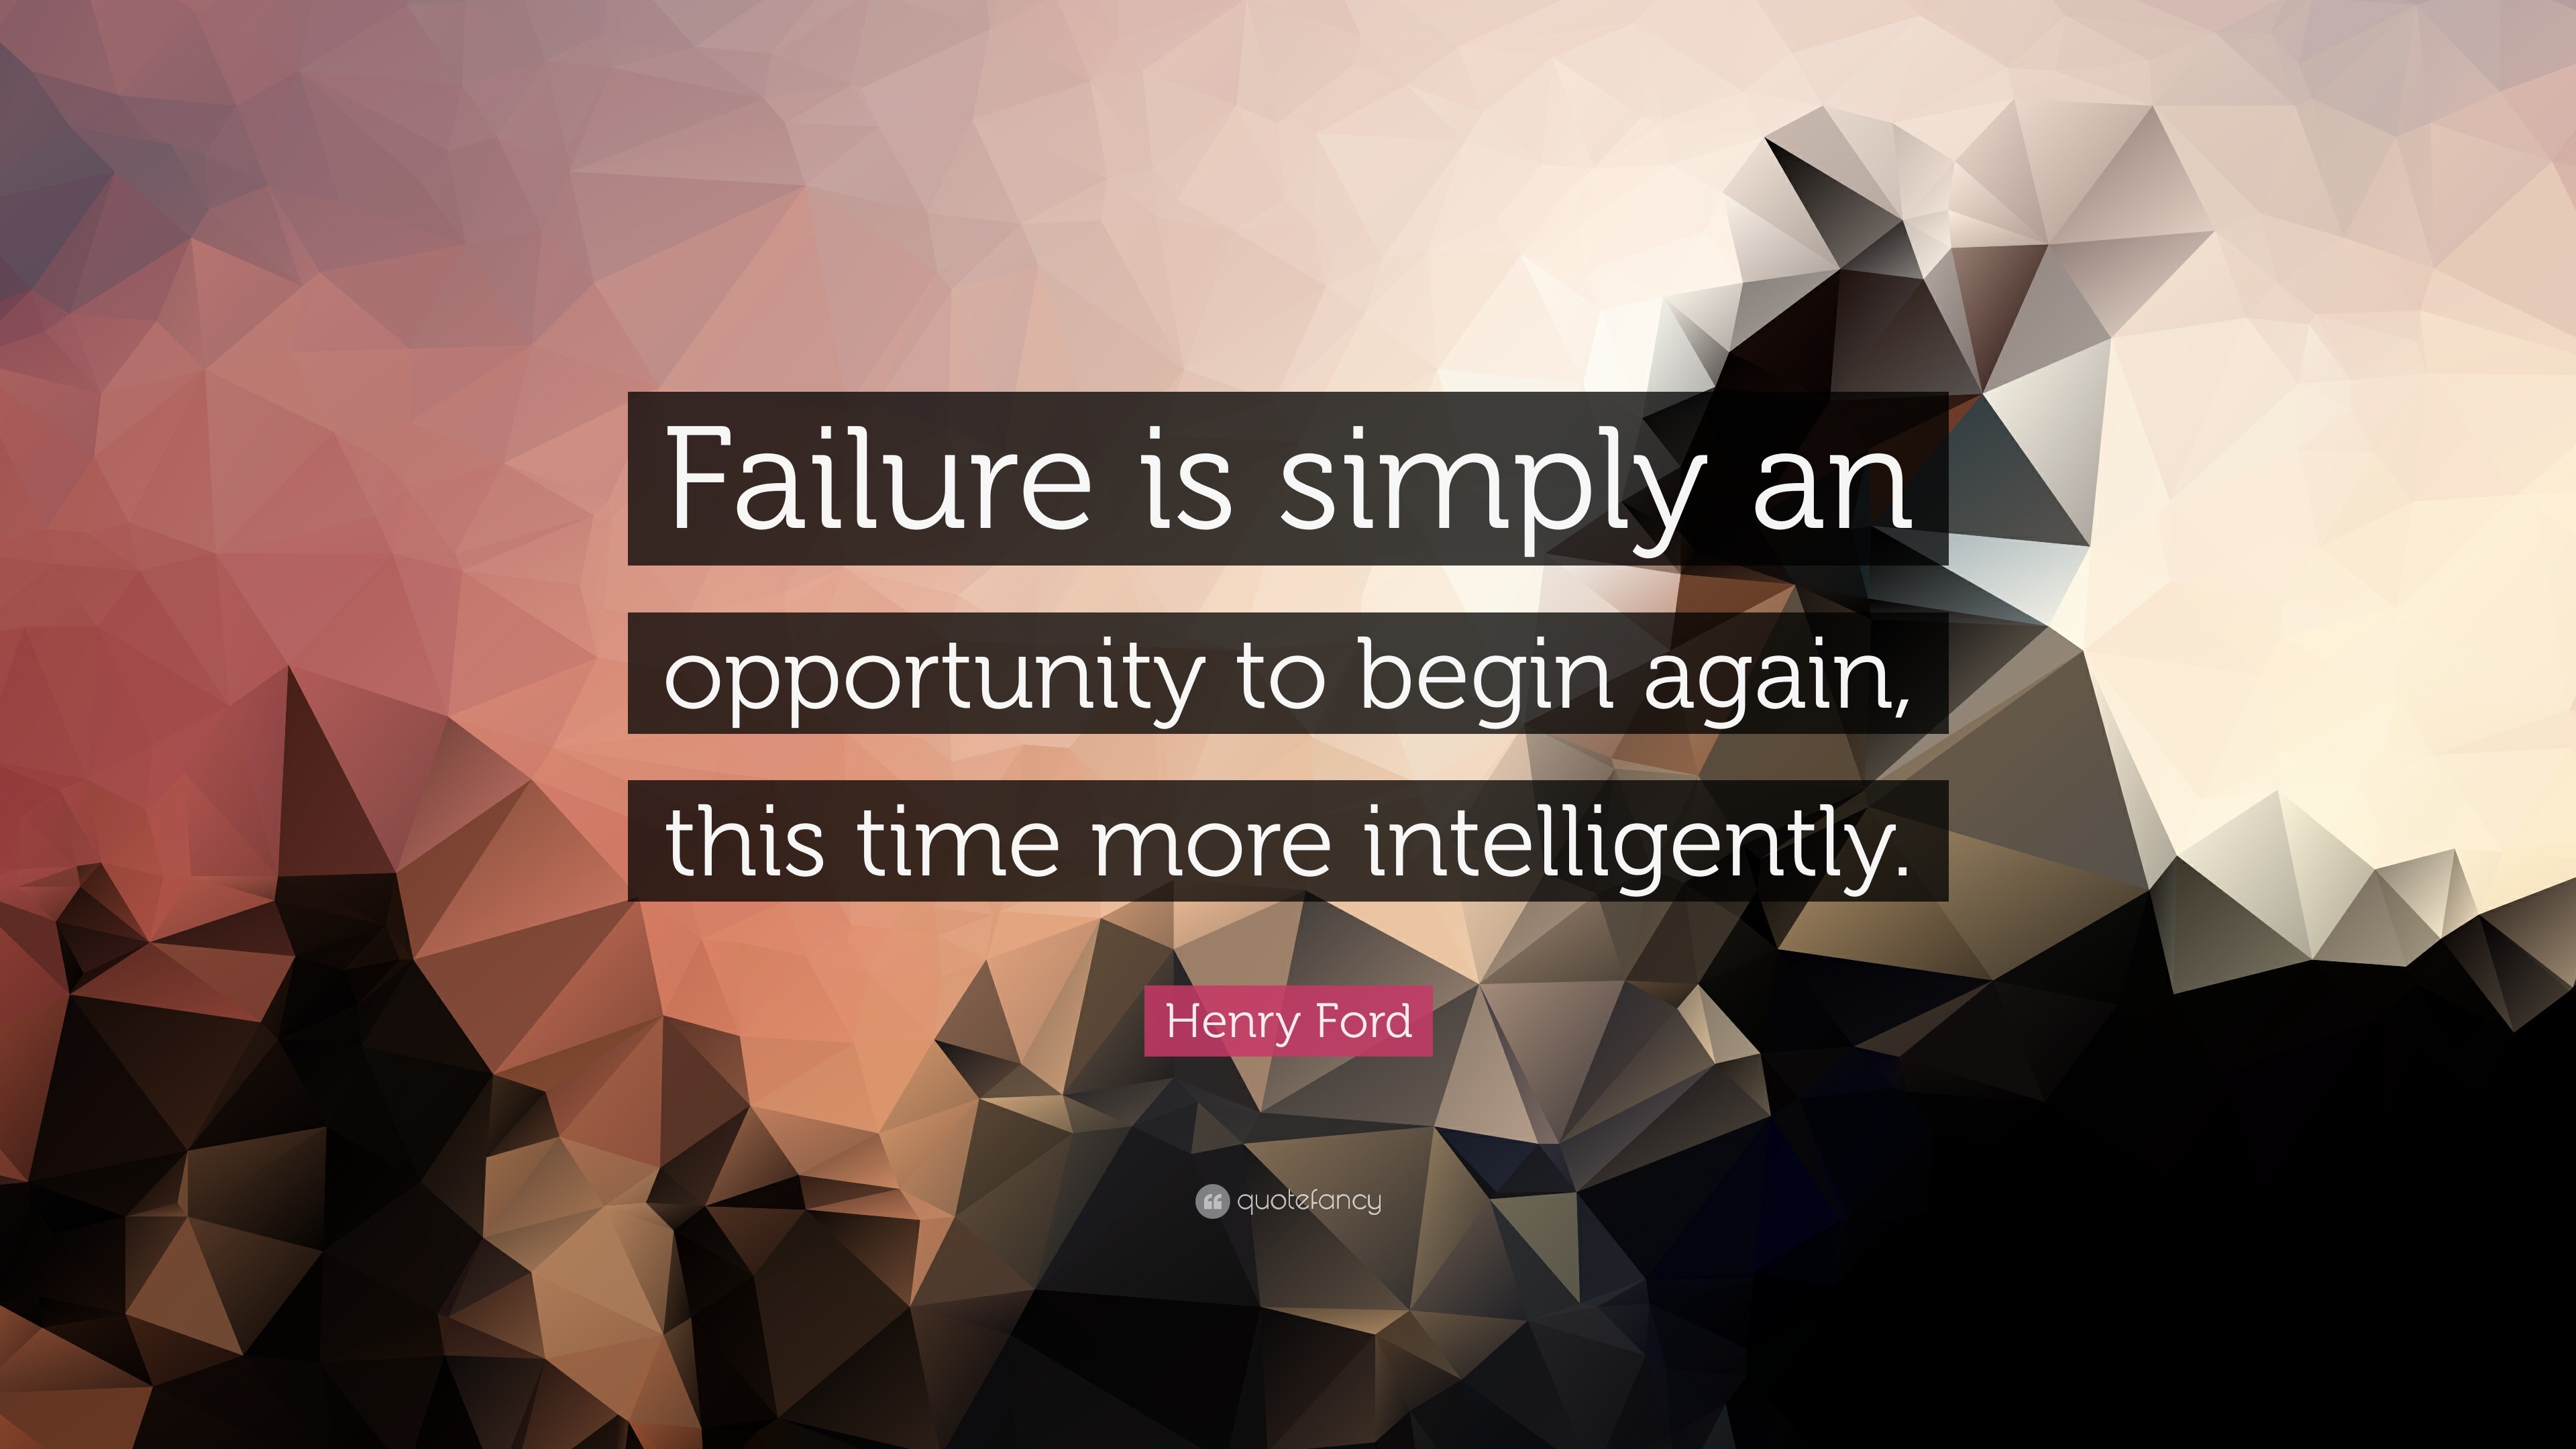 Henry Ford Quote: “Failure is simply an opportunity to begin again